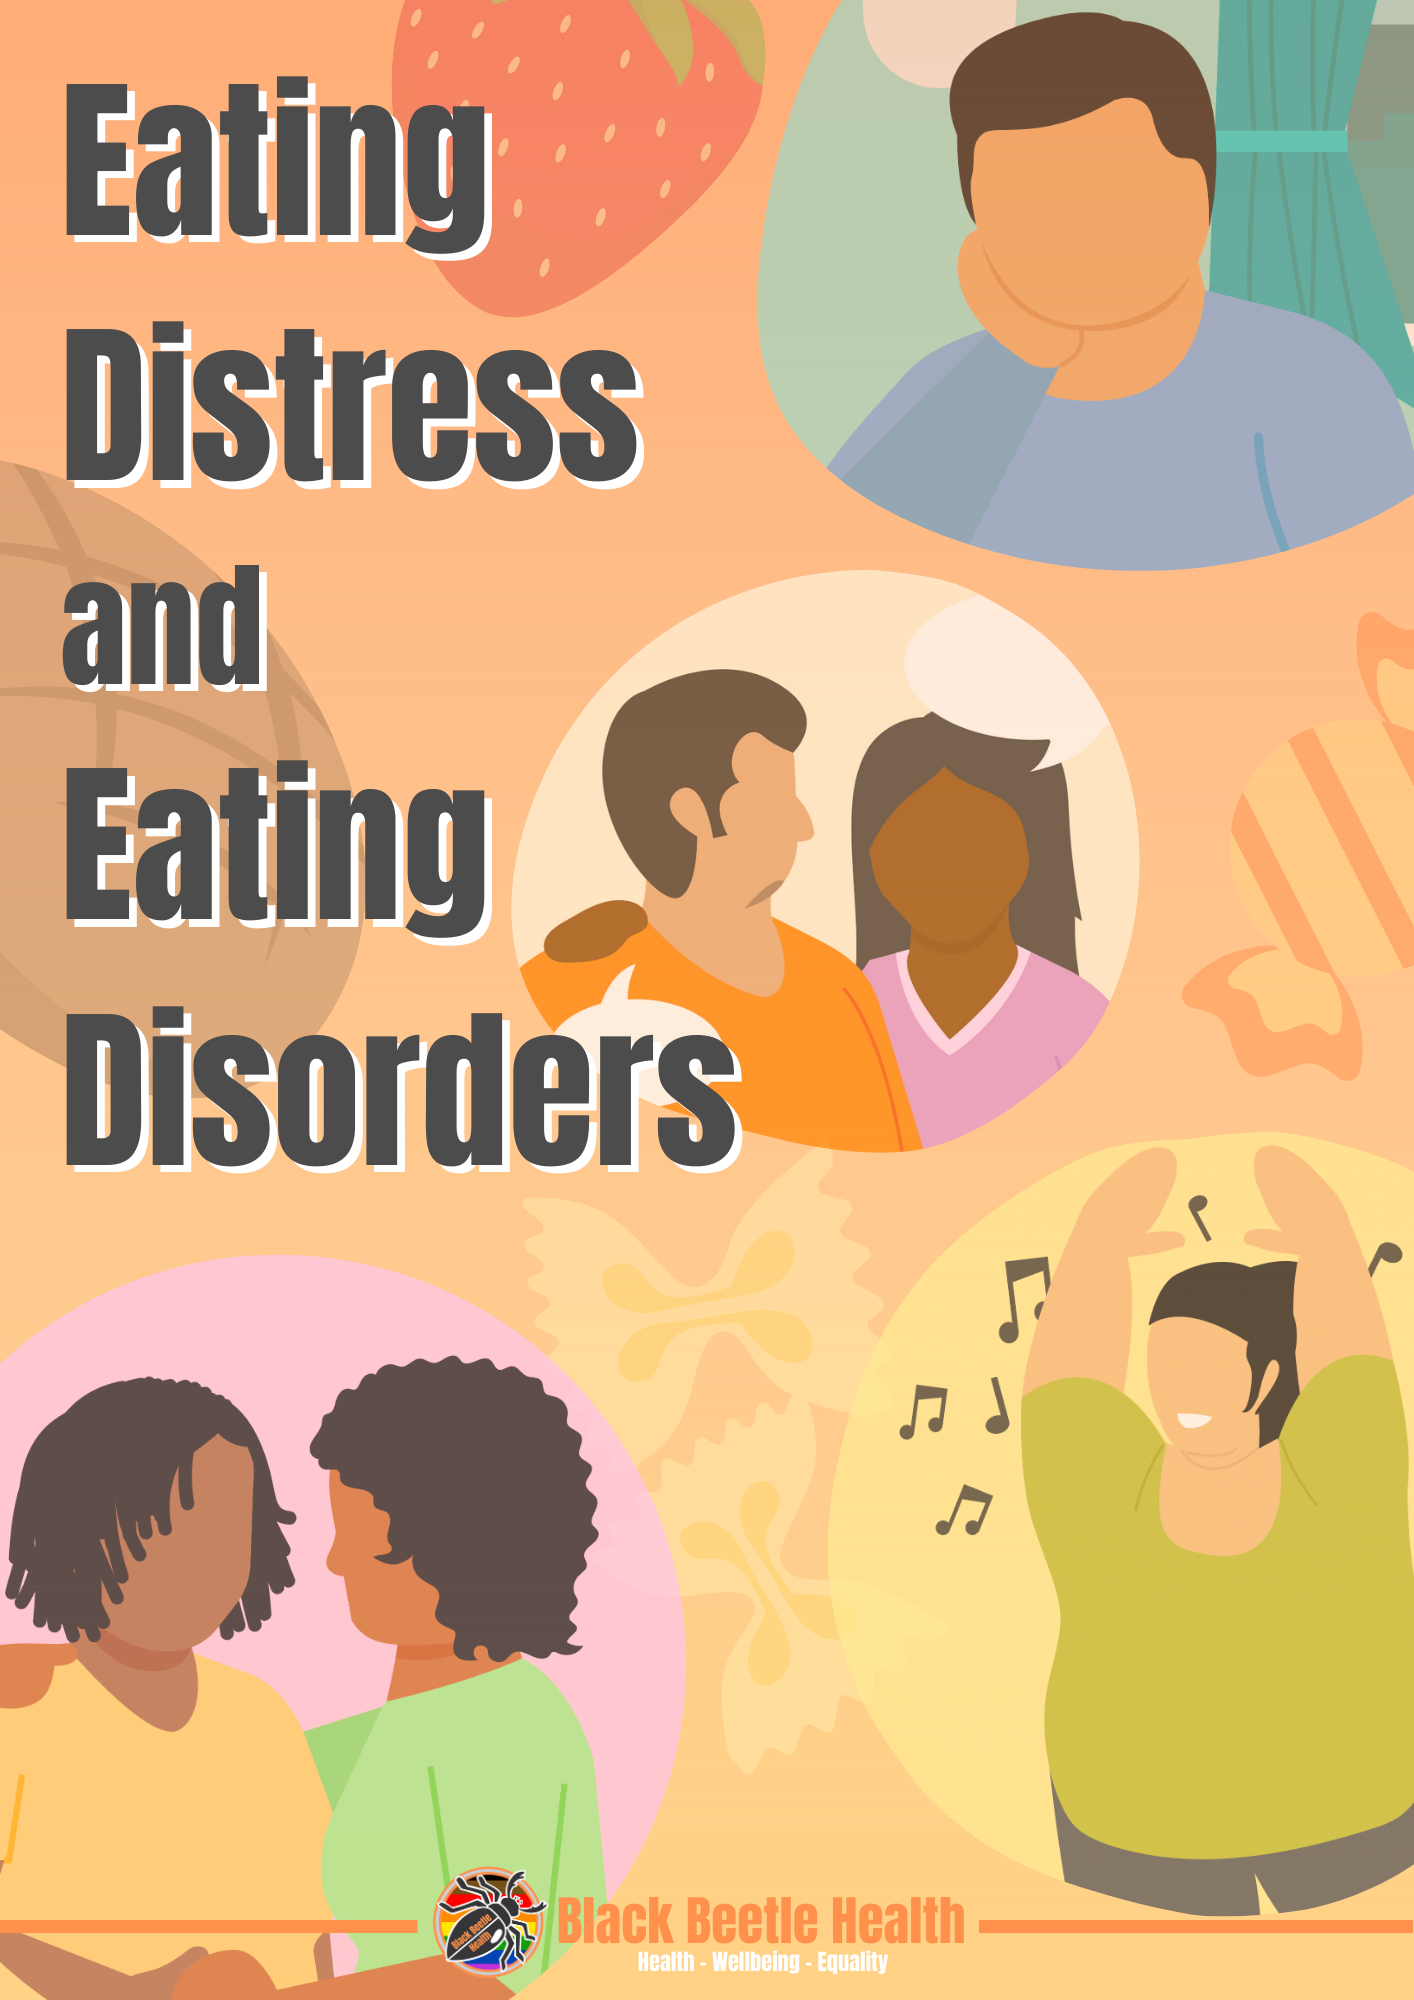 Eating Distress and Eating Disorders LGBTQ+ Black and People of Colour